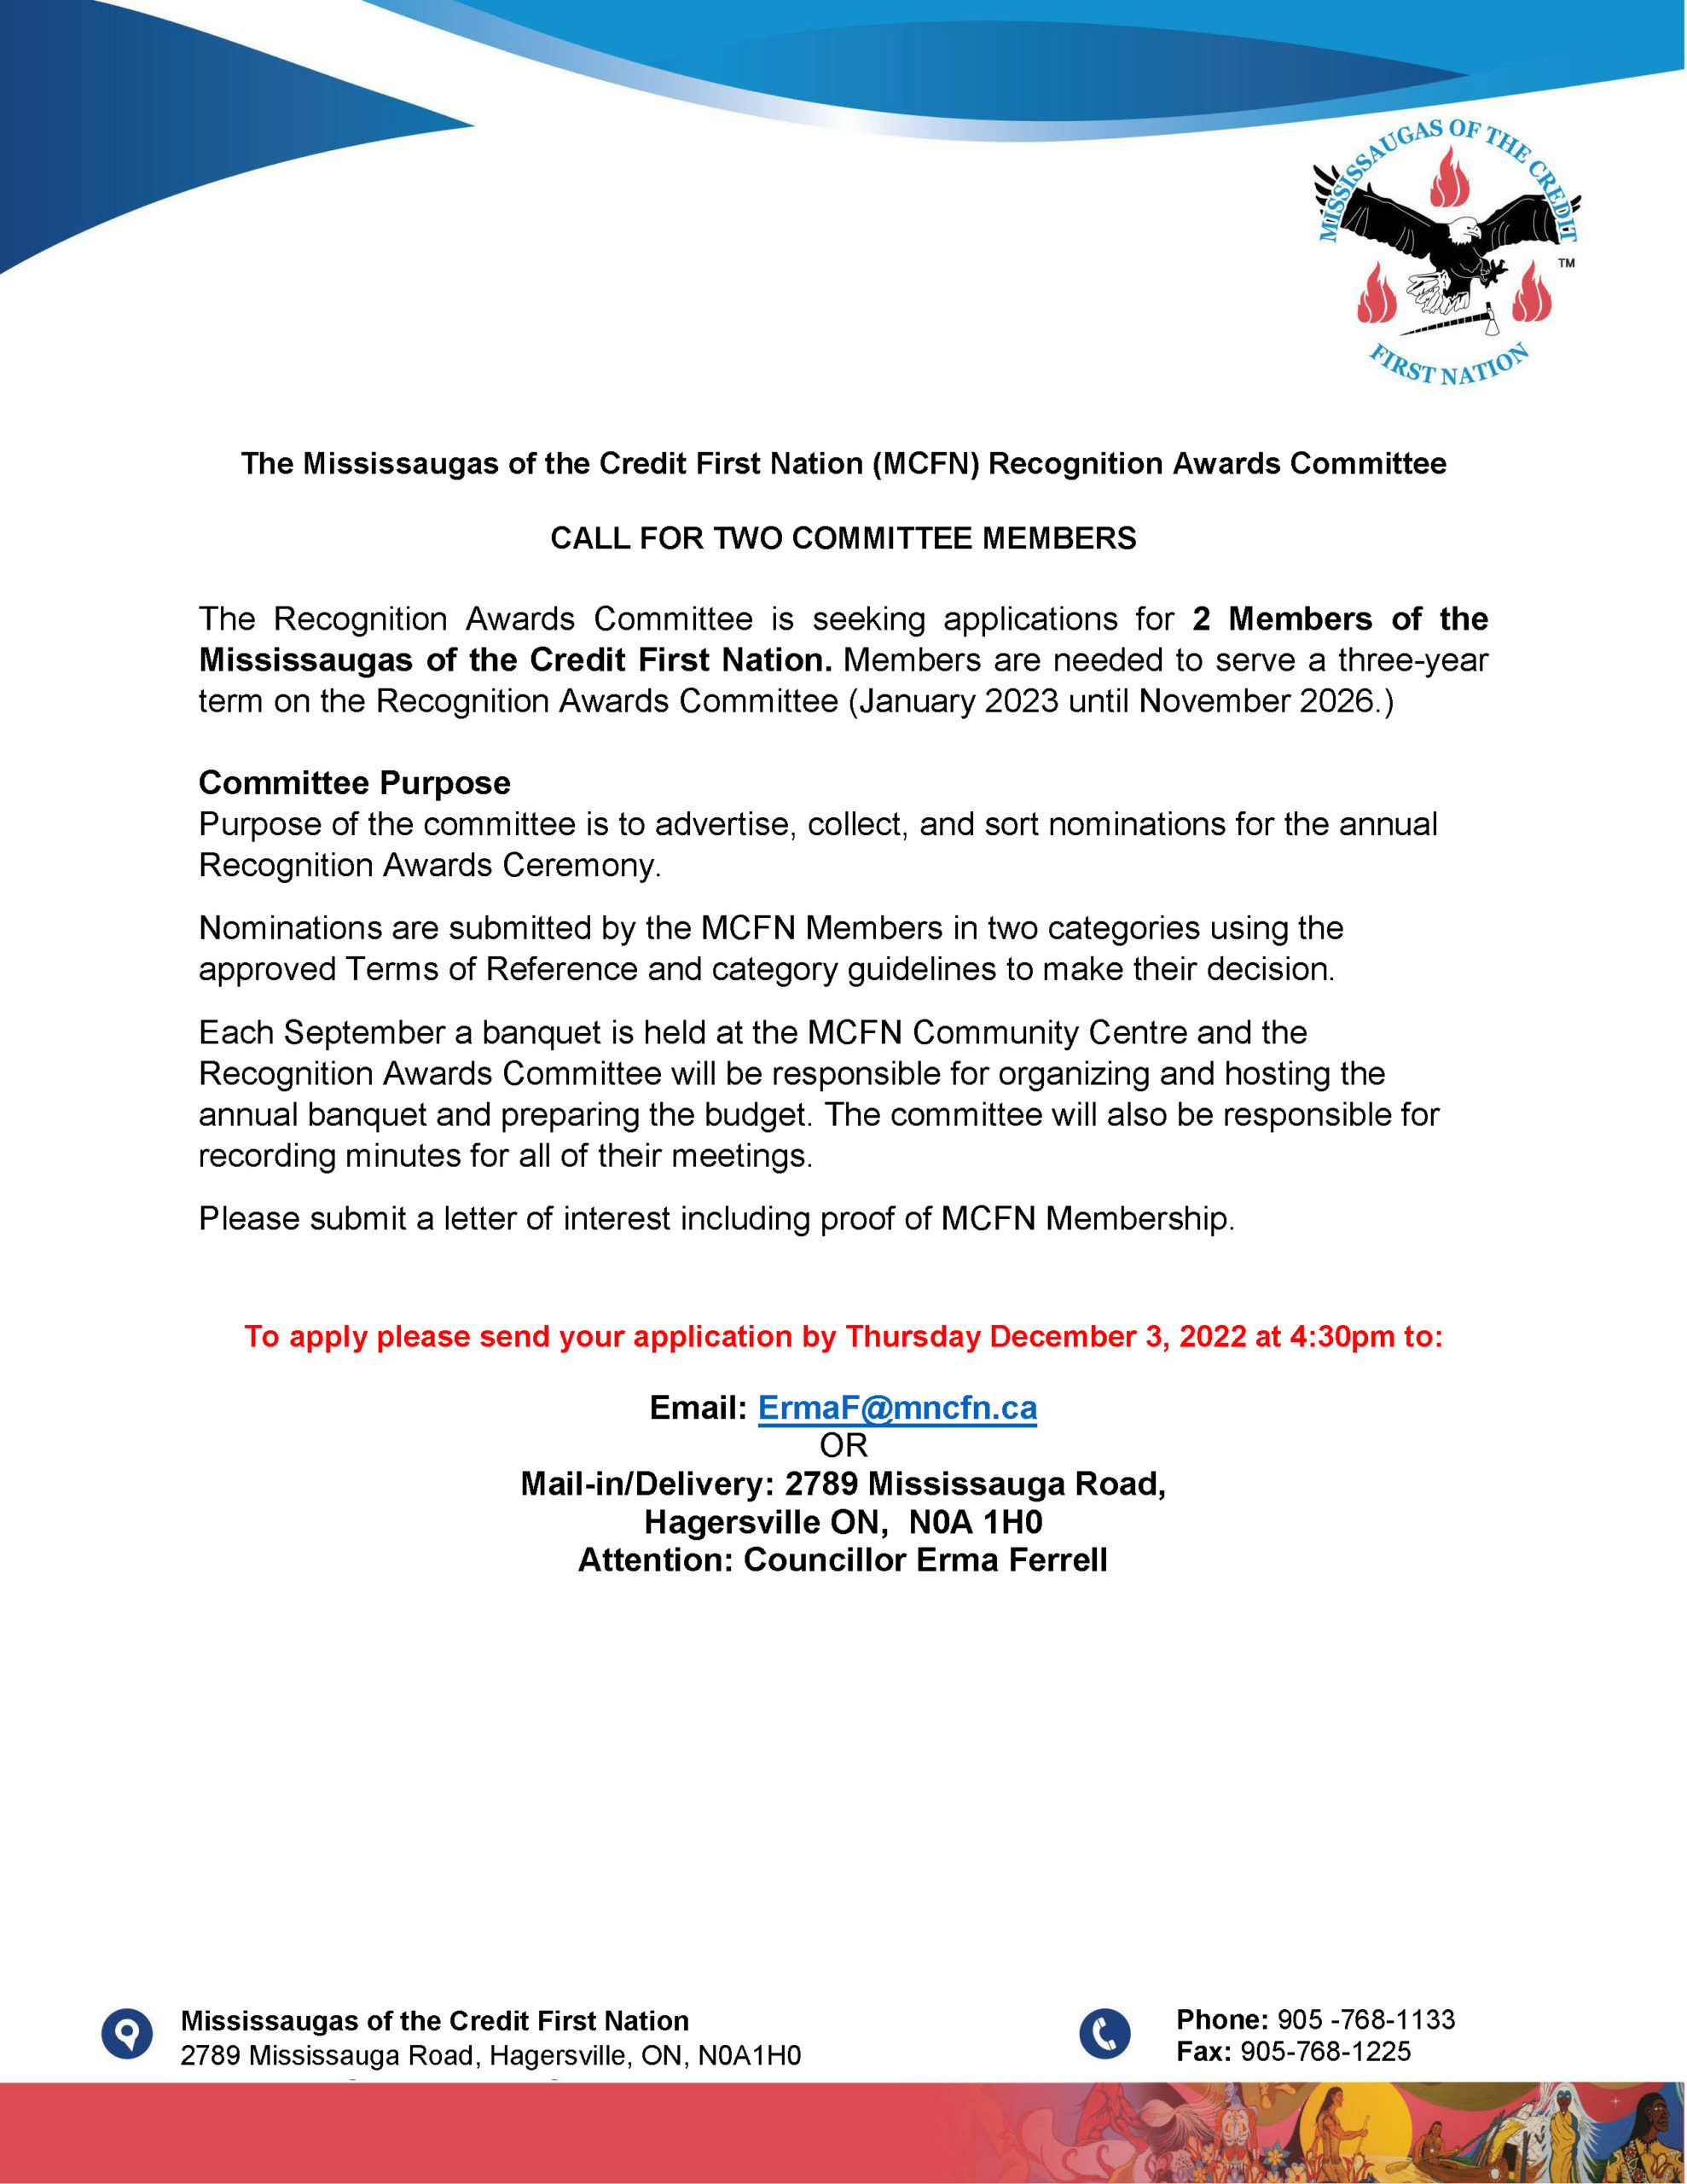 Call for two Recognition Awards Committee Members